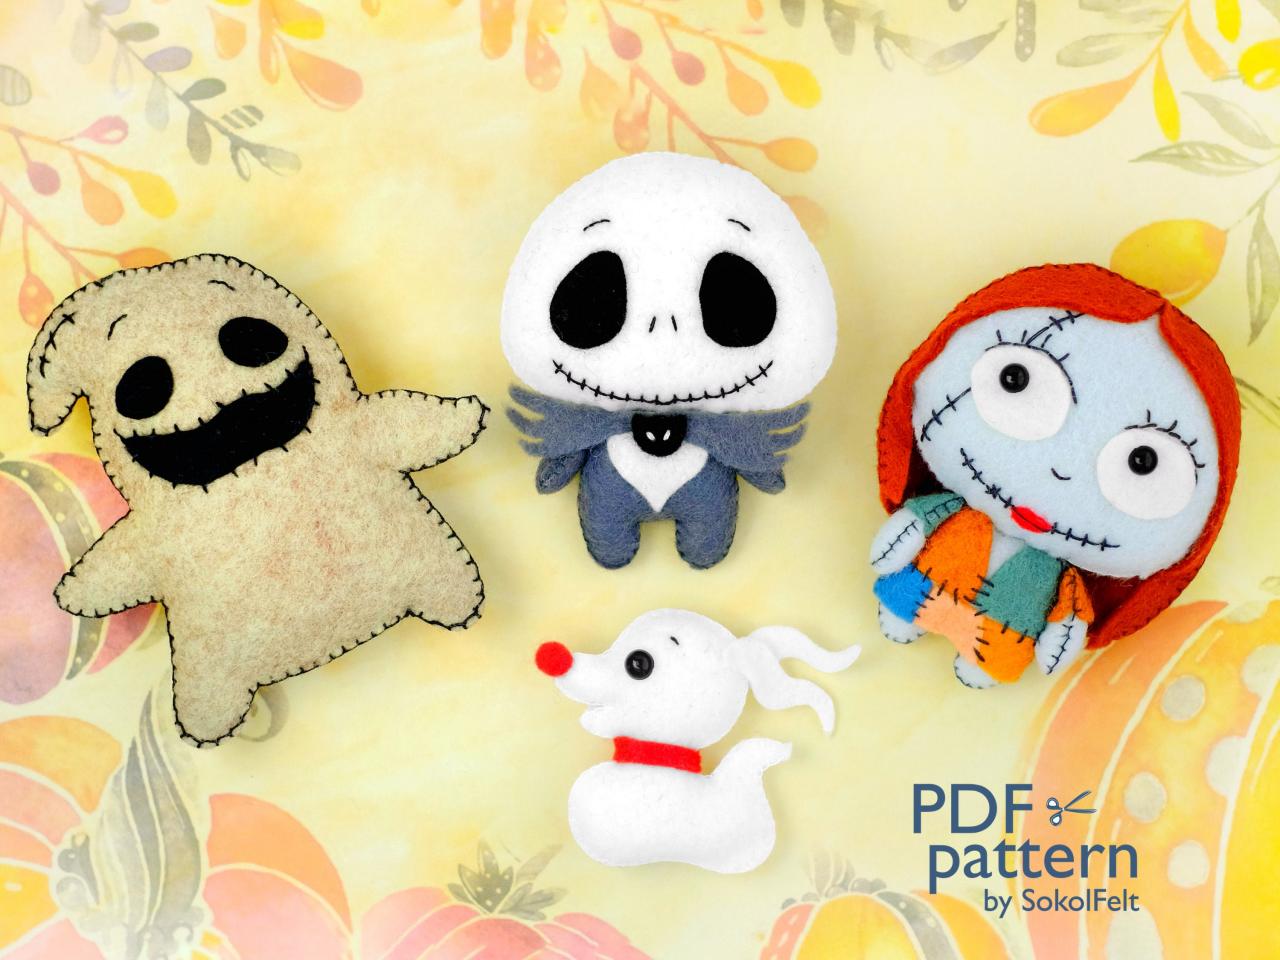 Set of 4 Halloween felt toy PDF and SVG patterns, Nightmare before Christmas, Jack Skellington, Sally, Oogie Boogie and Zero